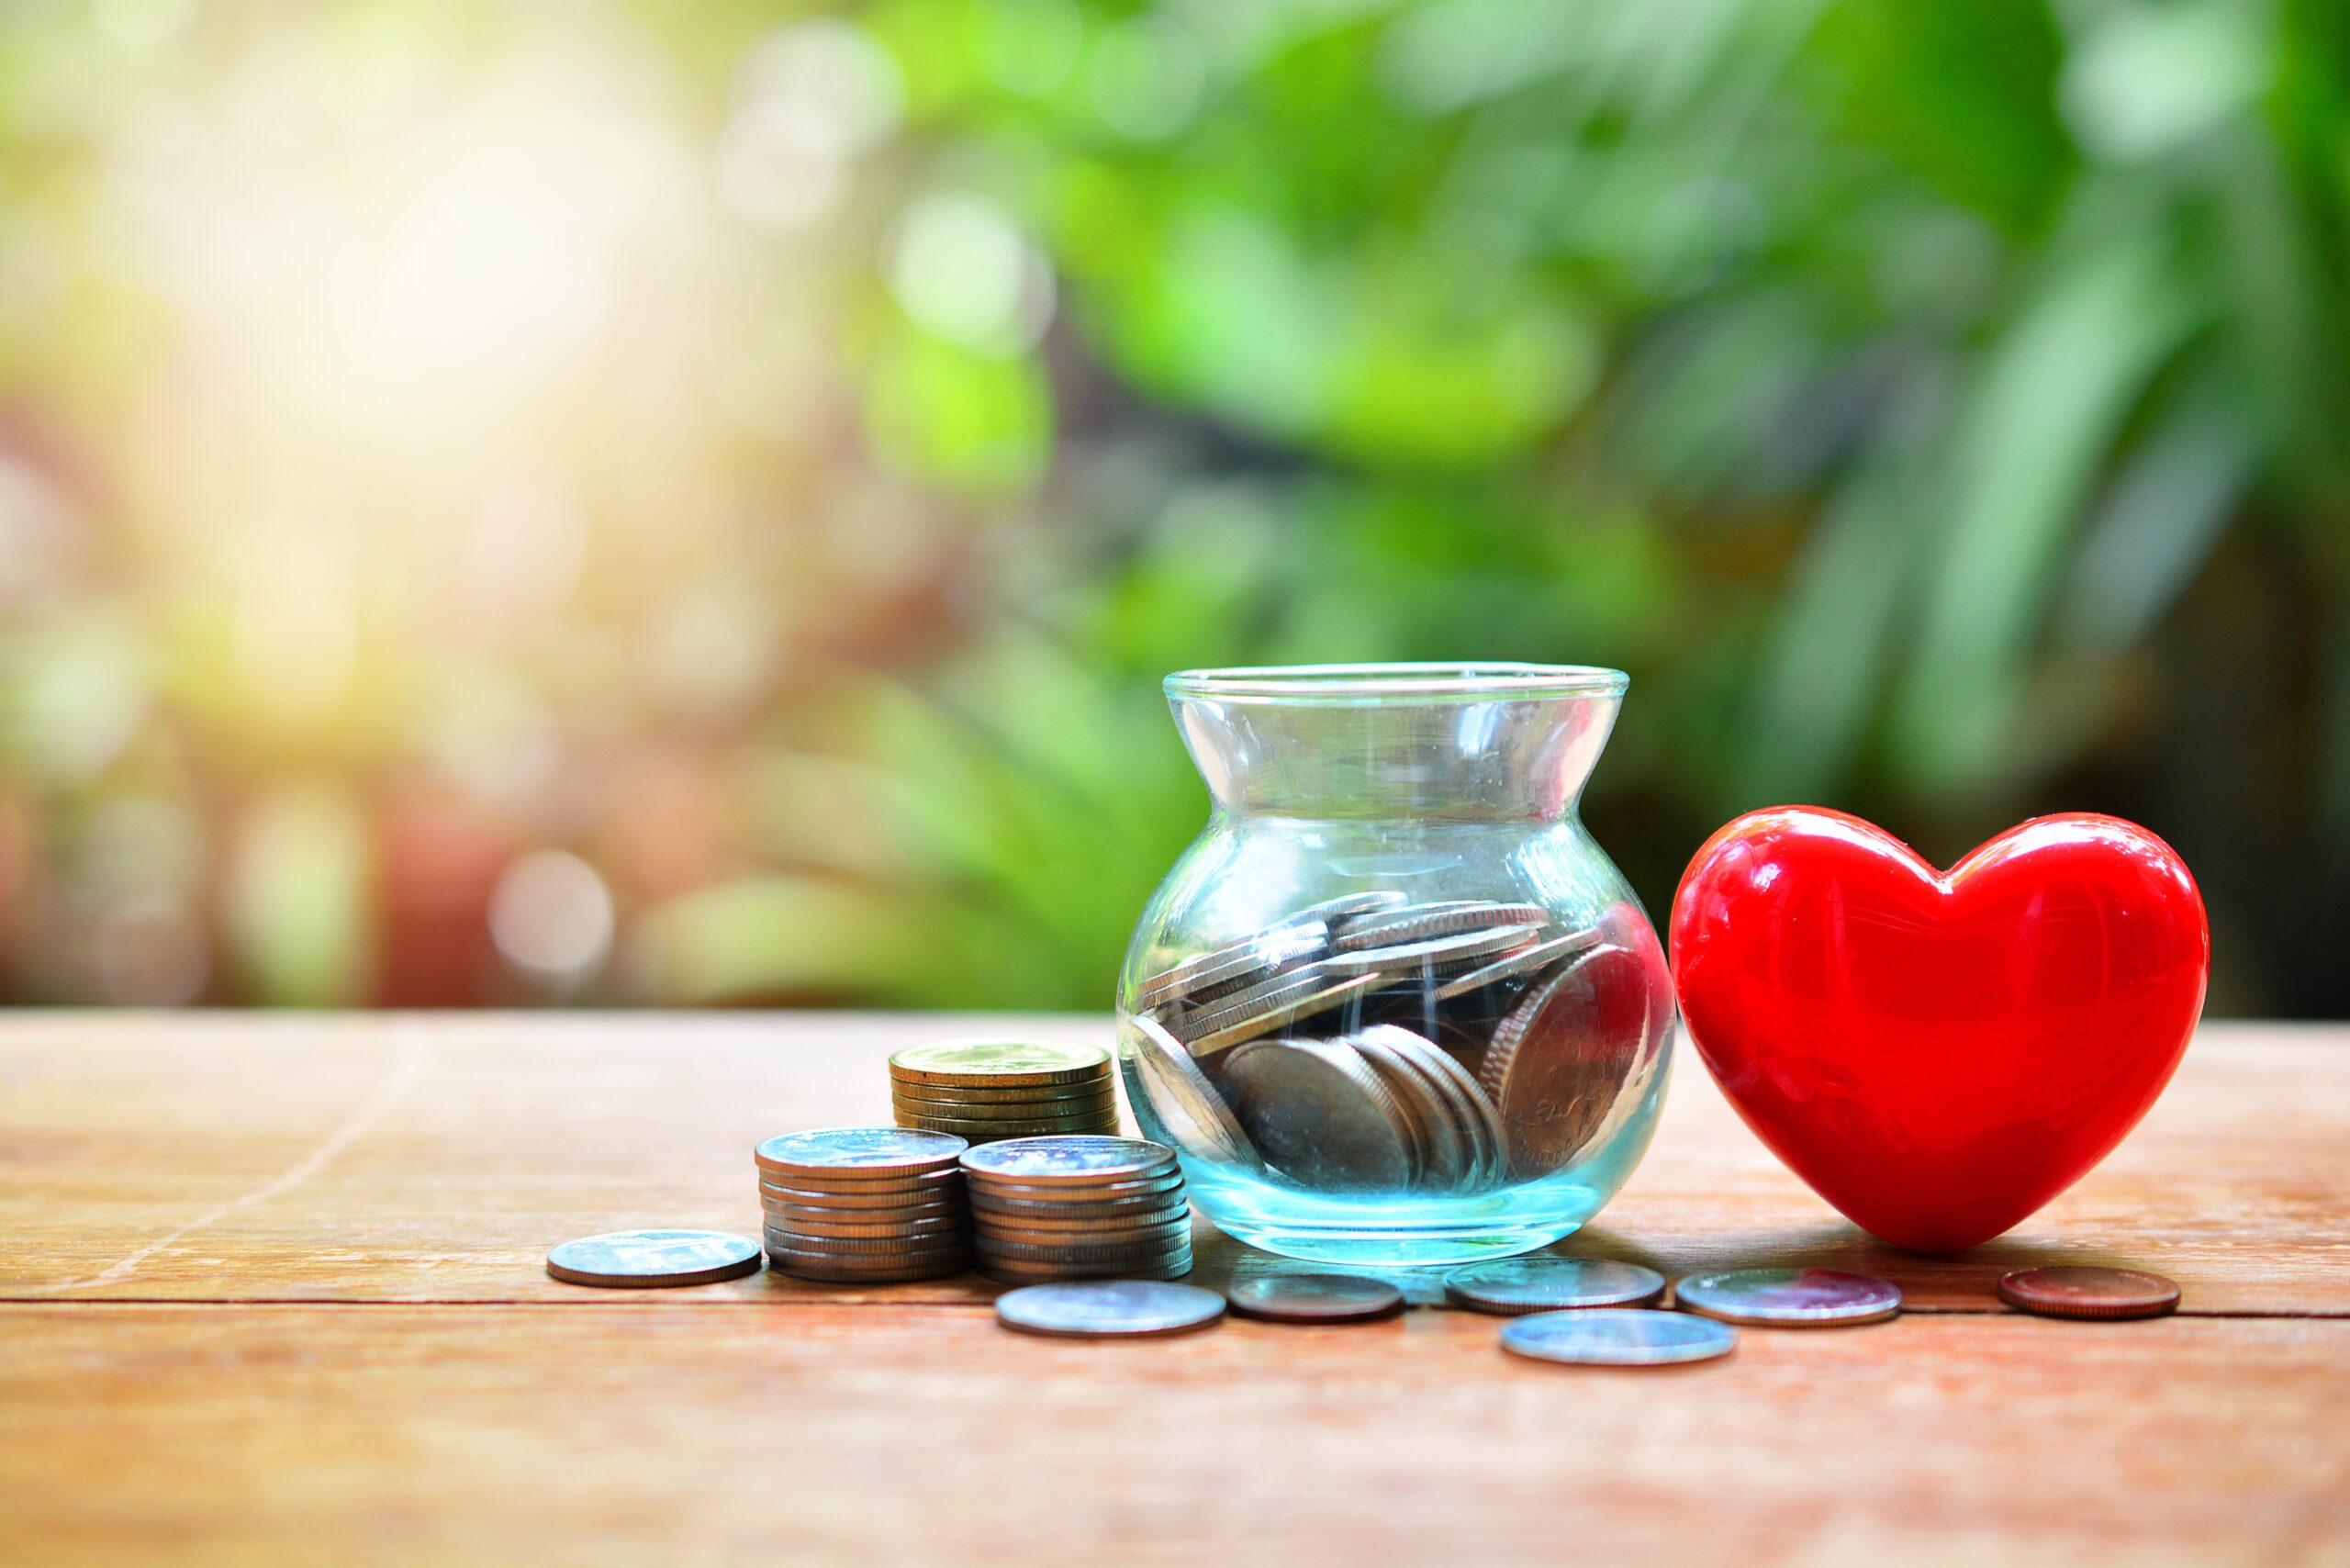 A jar with coins in it sits on a table next to a red heart and other loose coins.